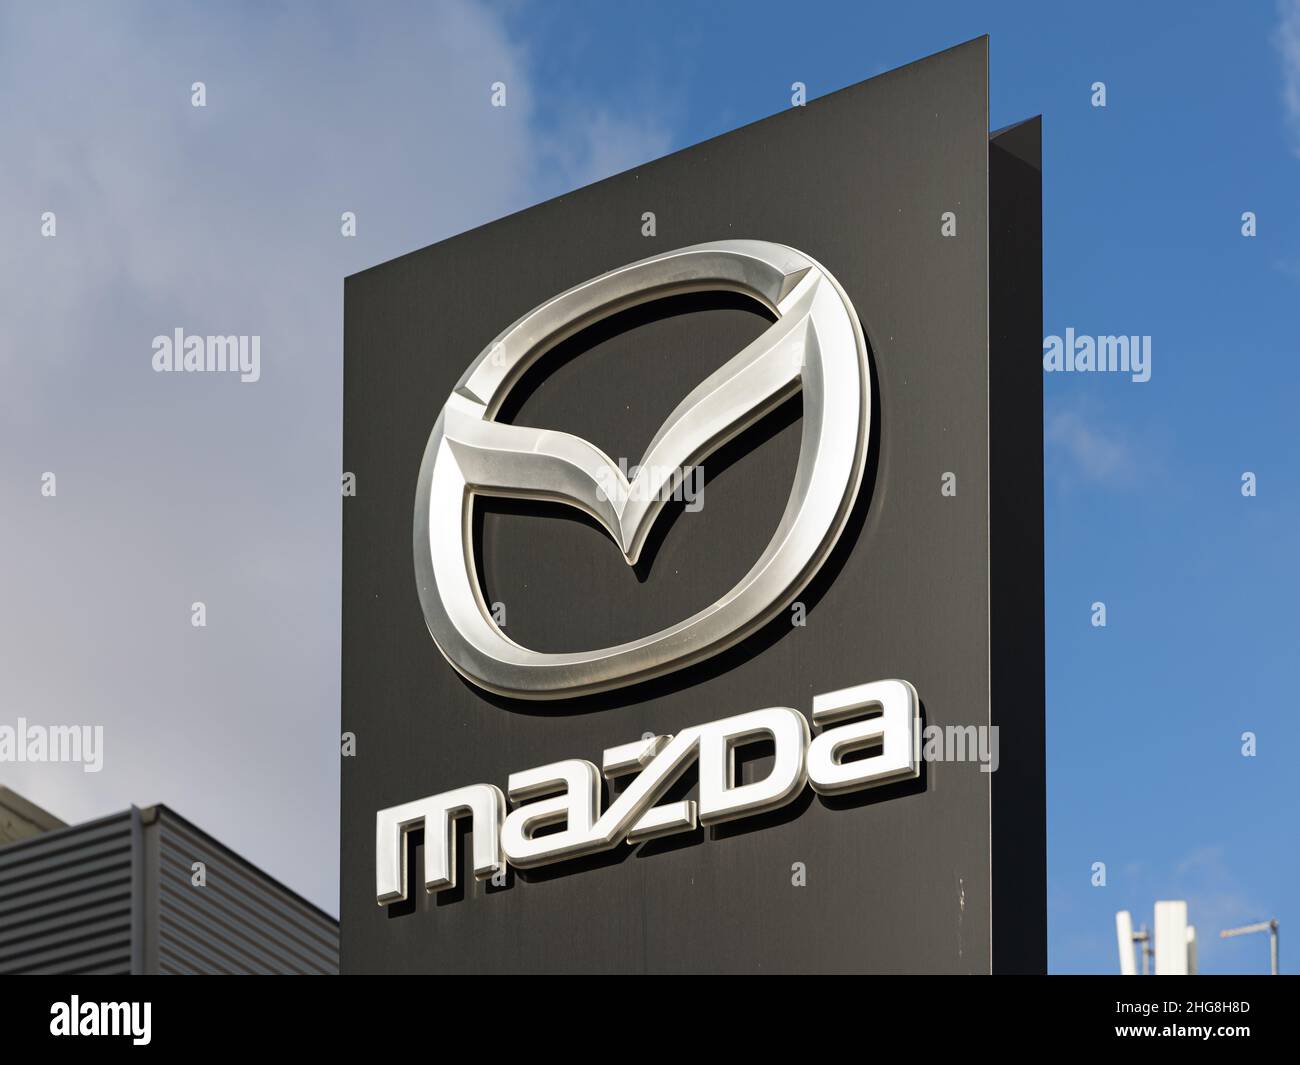 VALENCIA, SPAIN - JANUARY 13, 2022: Mazda is a Japanese multinational automobile manufacturer Stock Photo